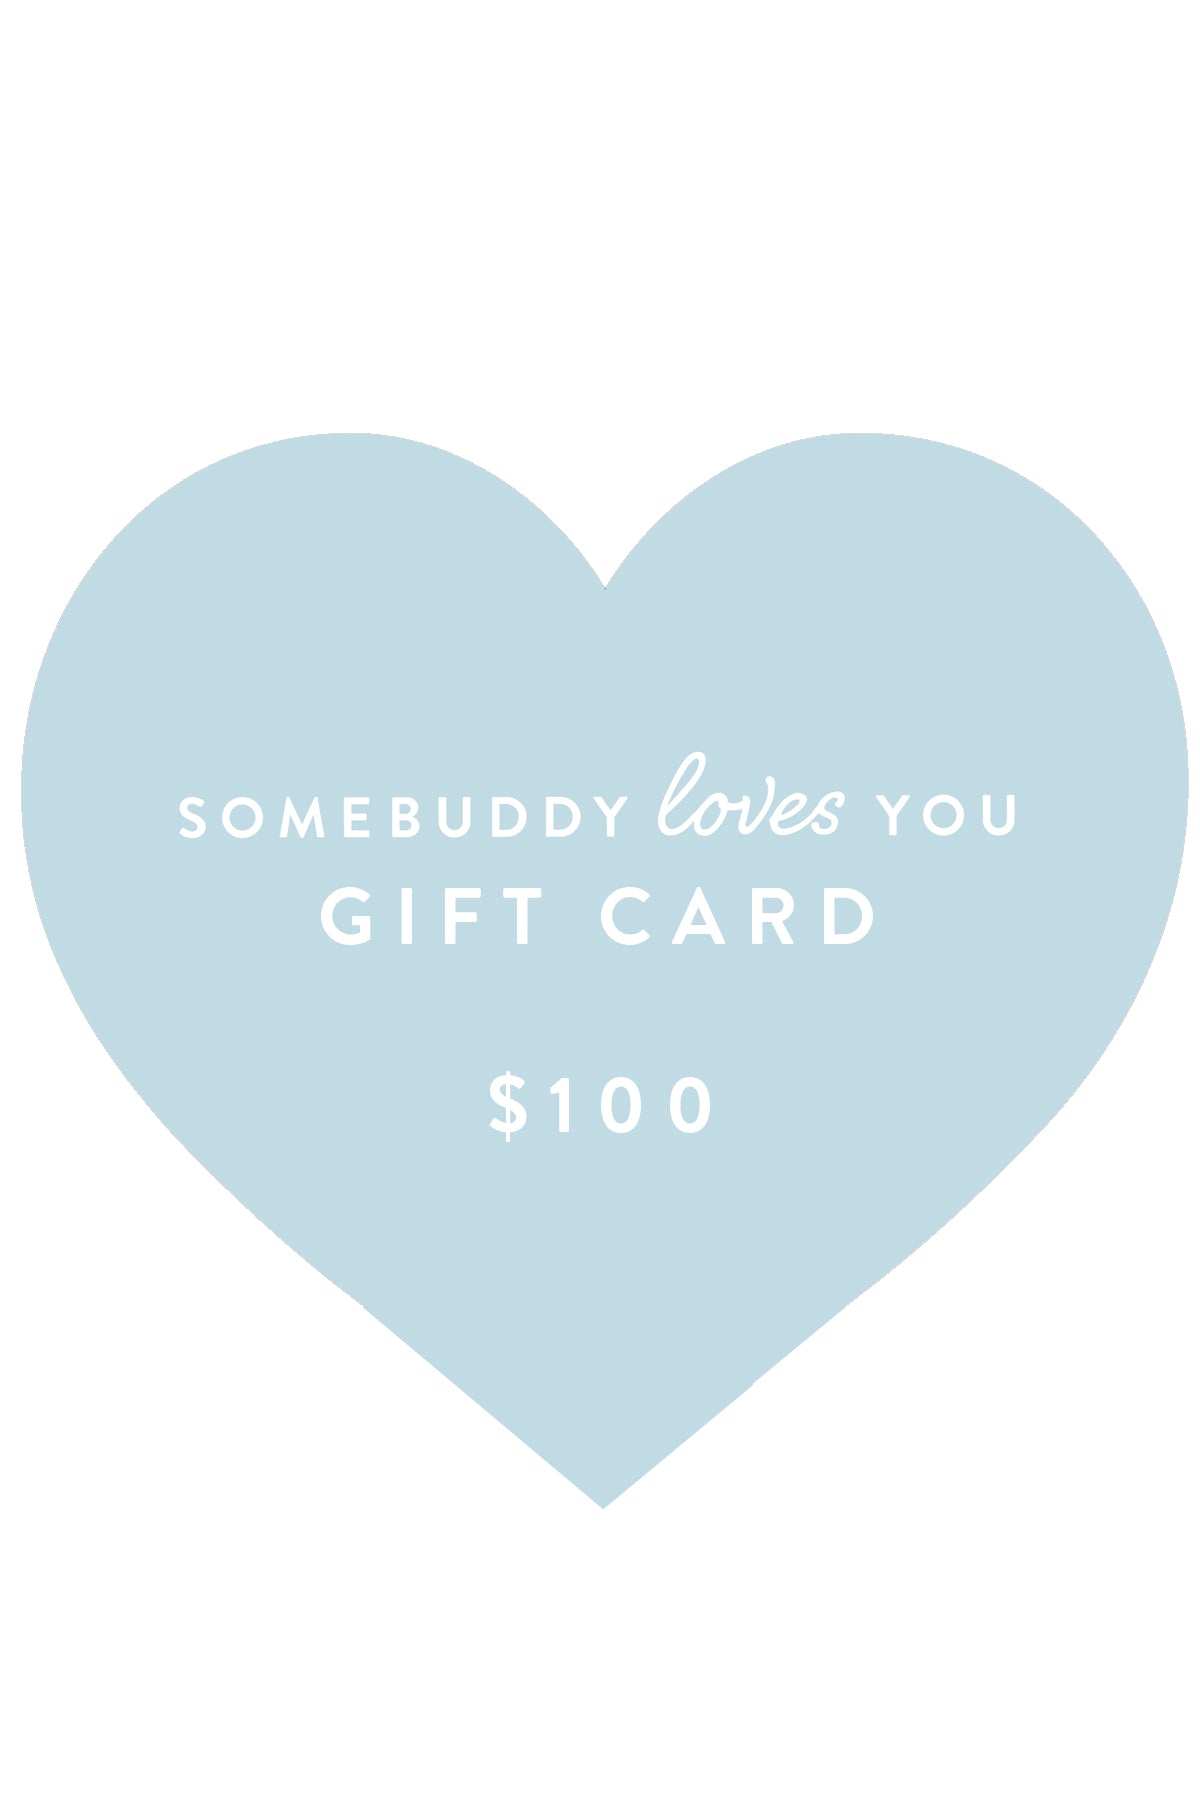 Somebuddy Loves You Gift Card $100